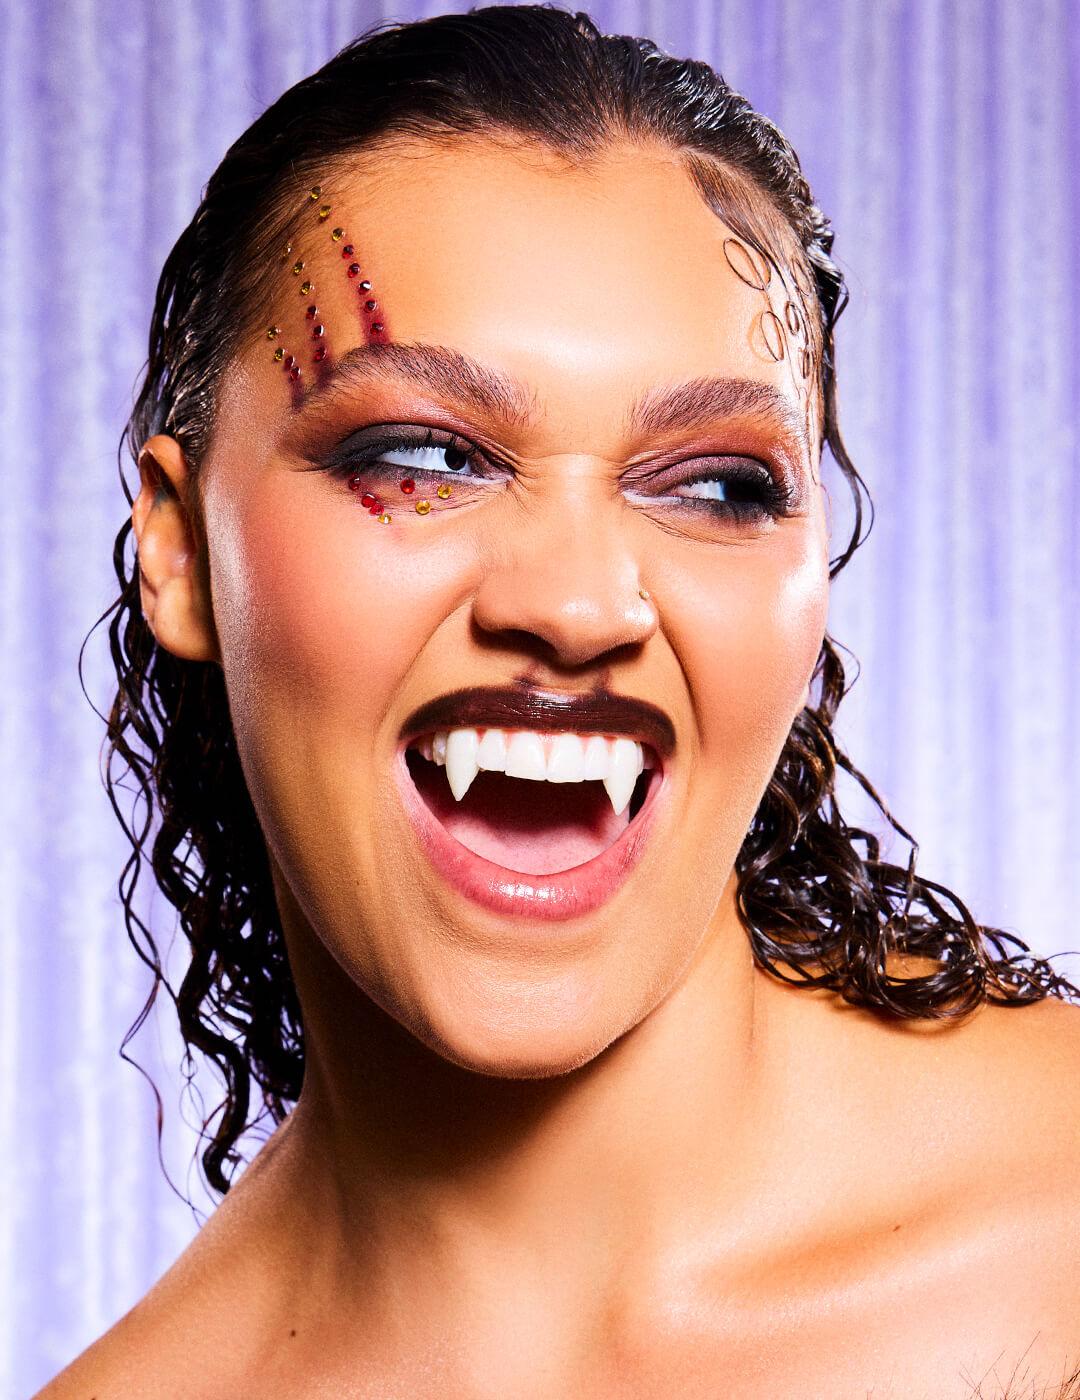 Model in a Halloween werewolf makeup look against lilac drapes background